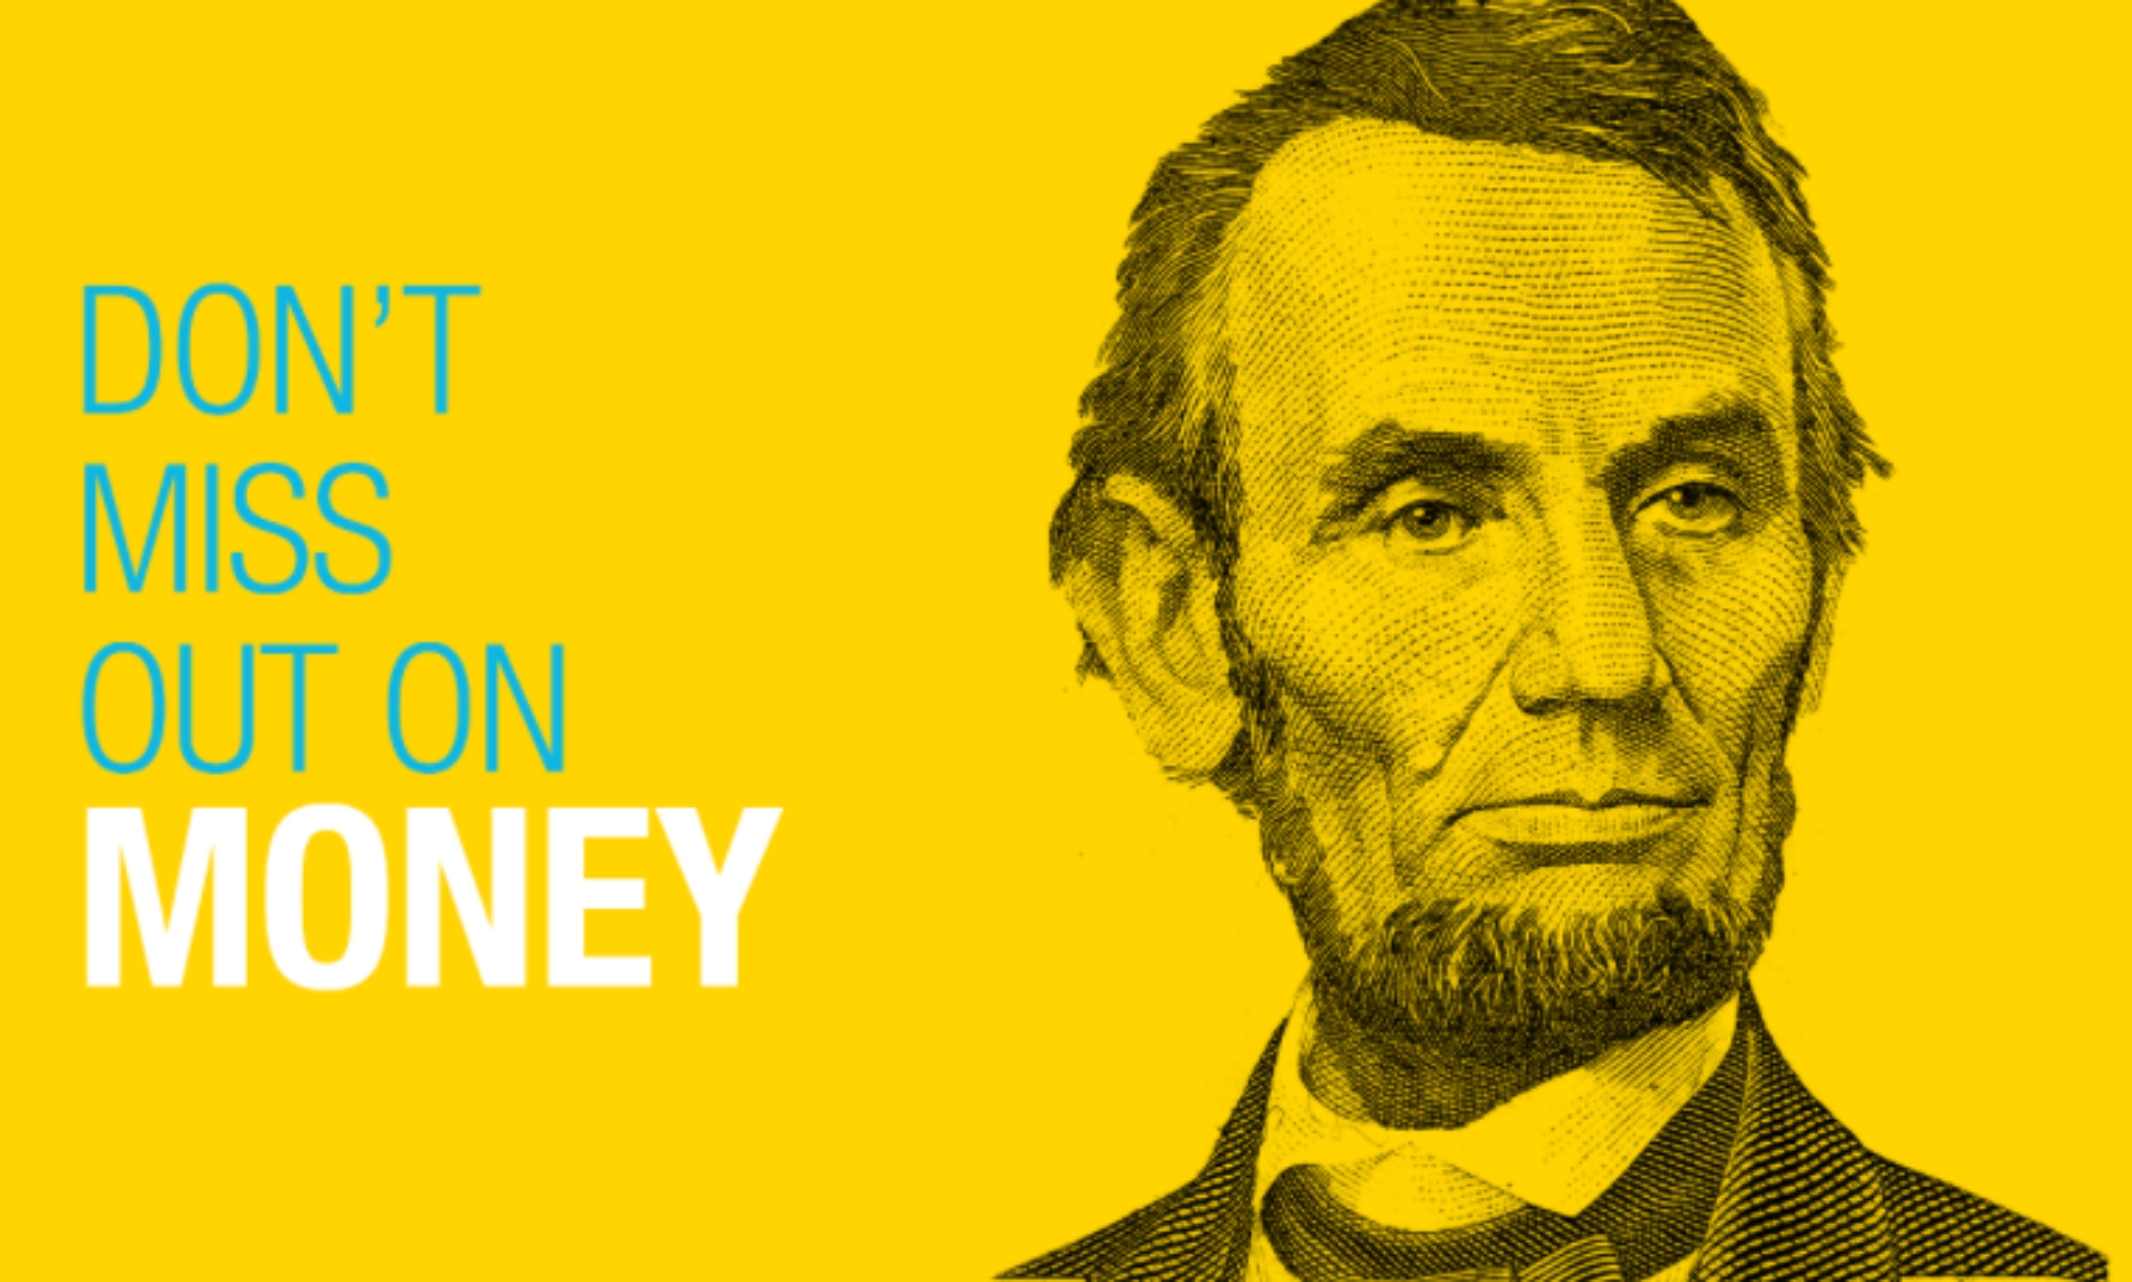 graphic with yellow background and Abe Lincoln's face from the five dollar bill saying "Don't miss out on money"